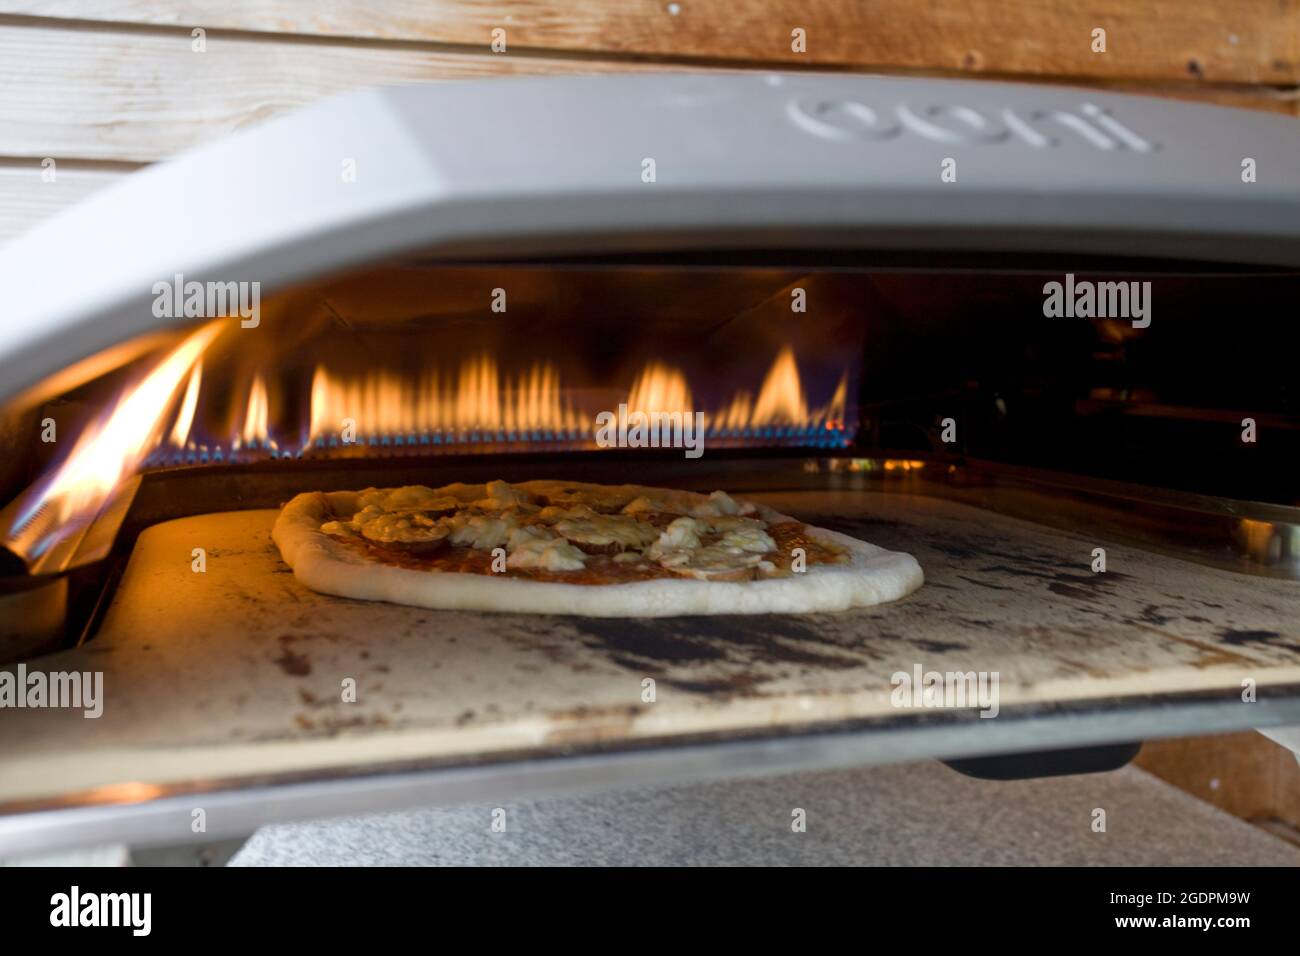 OONI Pizza oven with cooking pizza Stock Photo